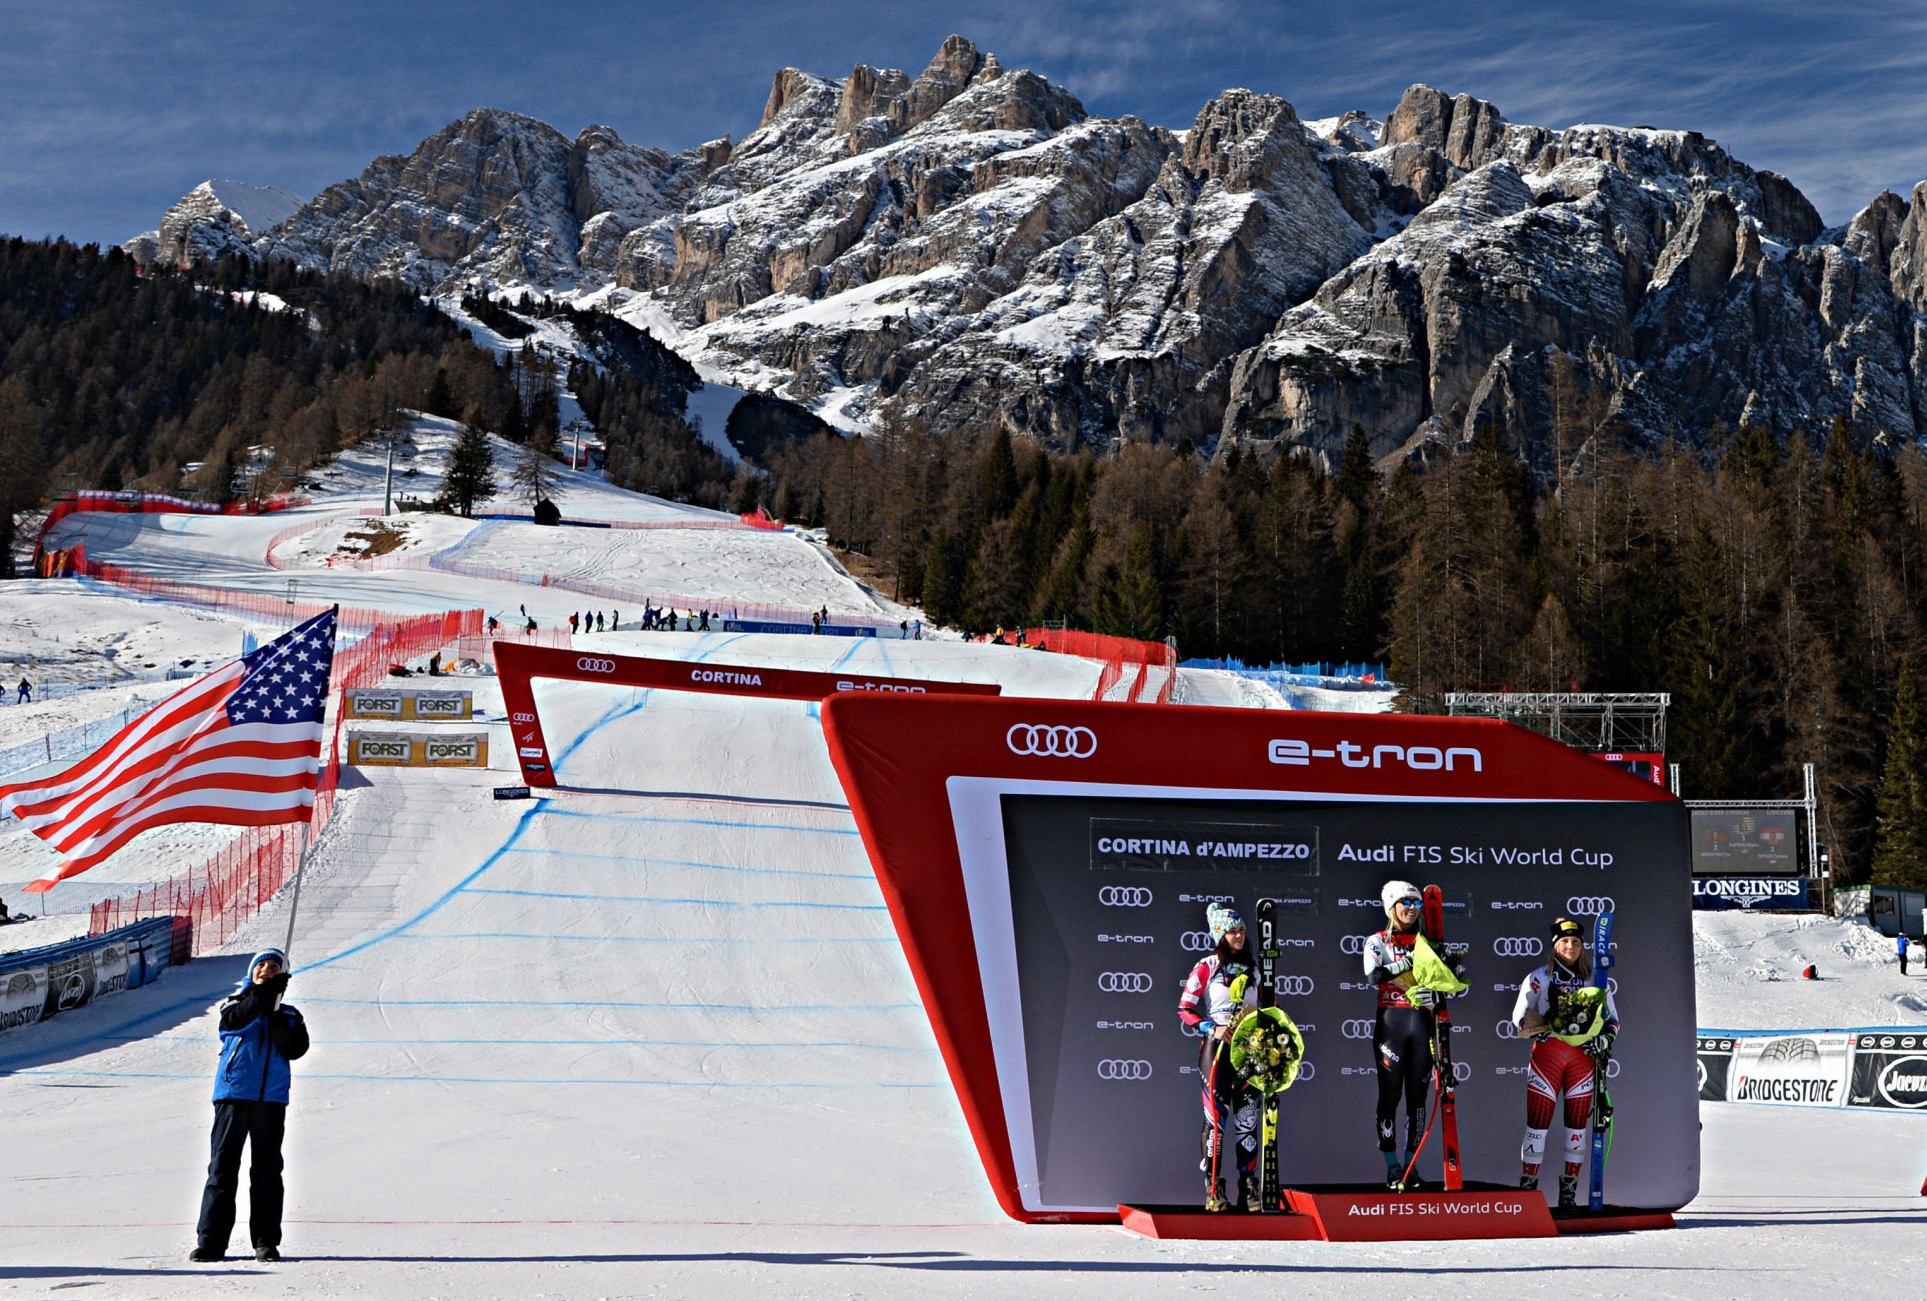 FIS Alpine Ski World Cup Finals cancelled because of coronavirus outbreak